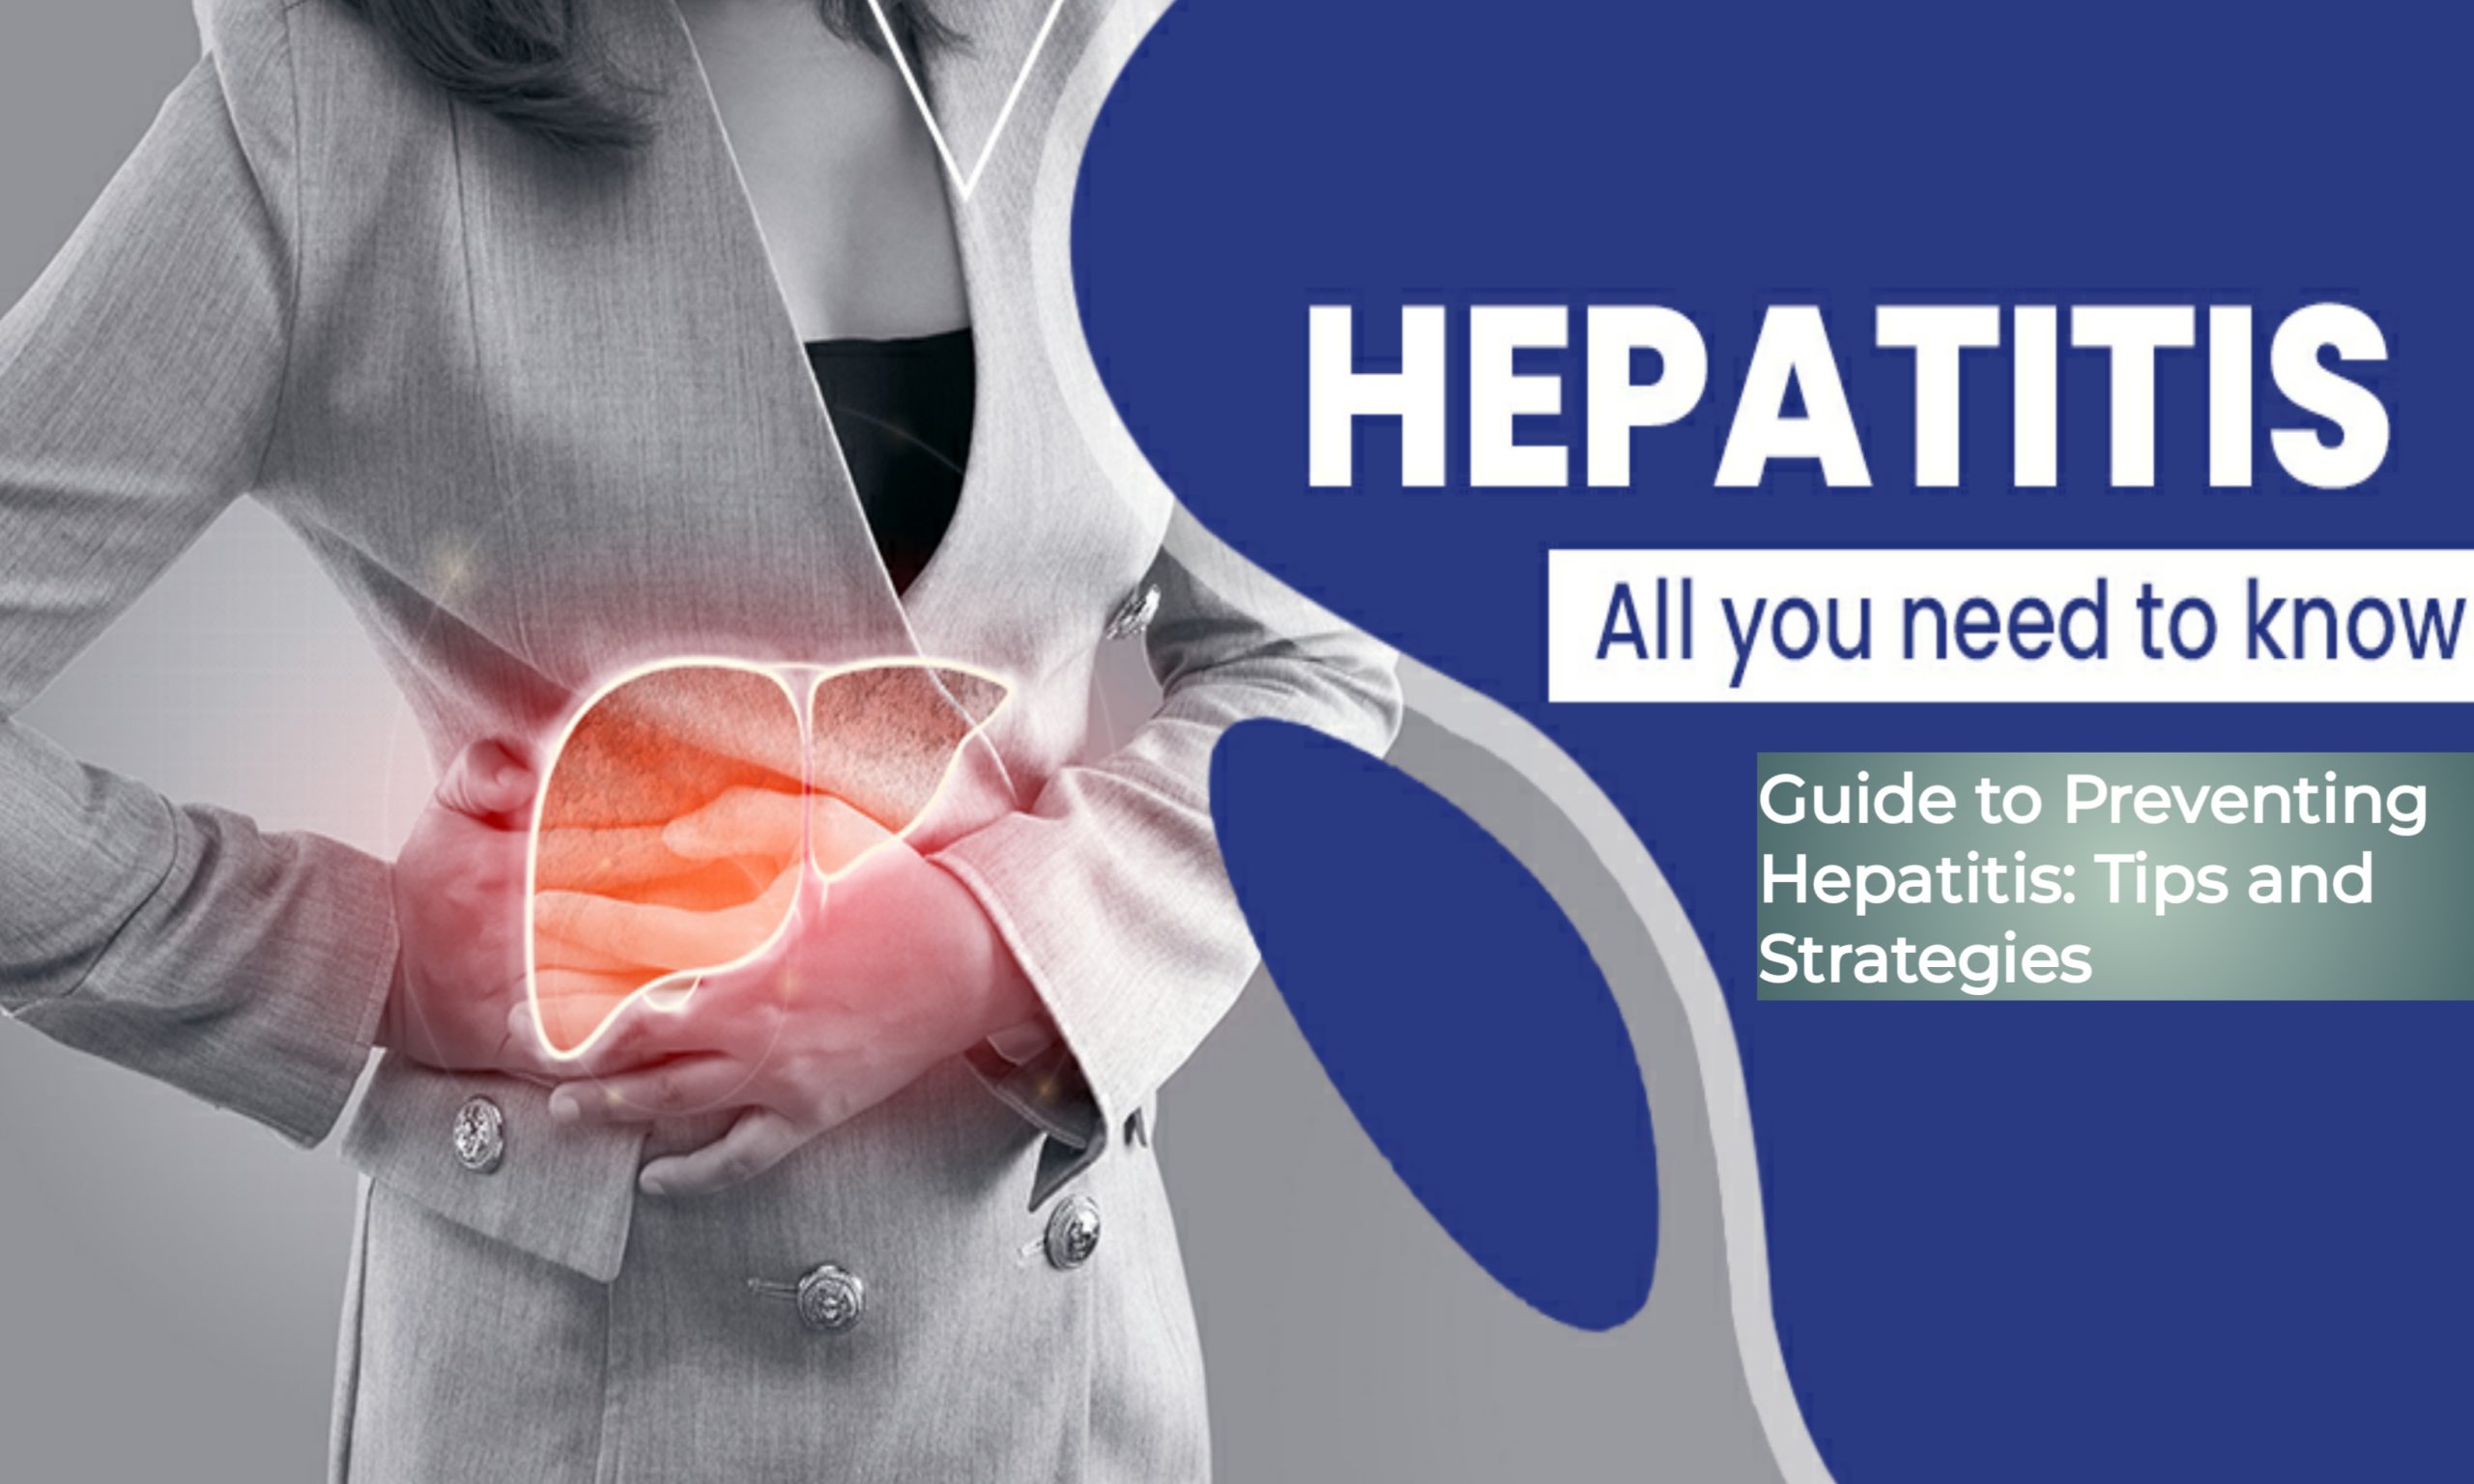 Defend Your Health: How to Stay Hepatitis-Free